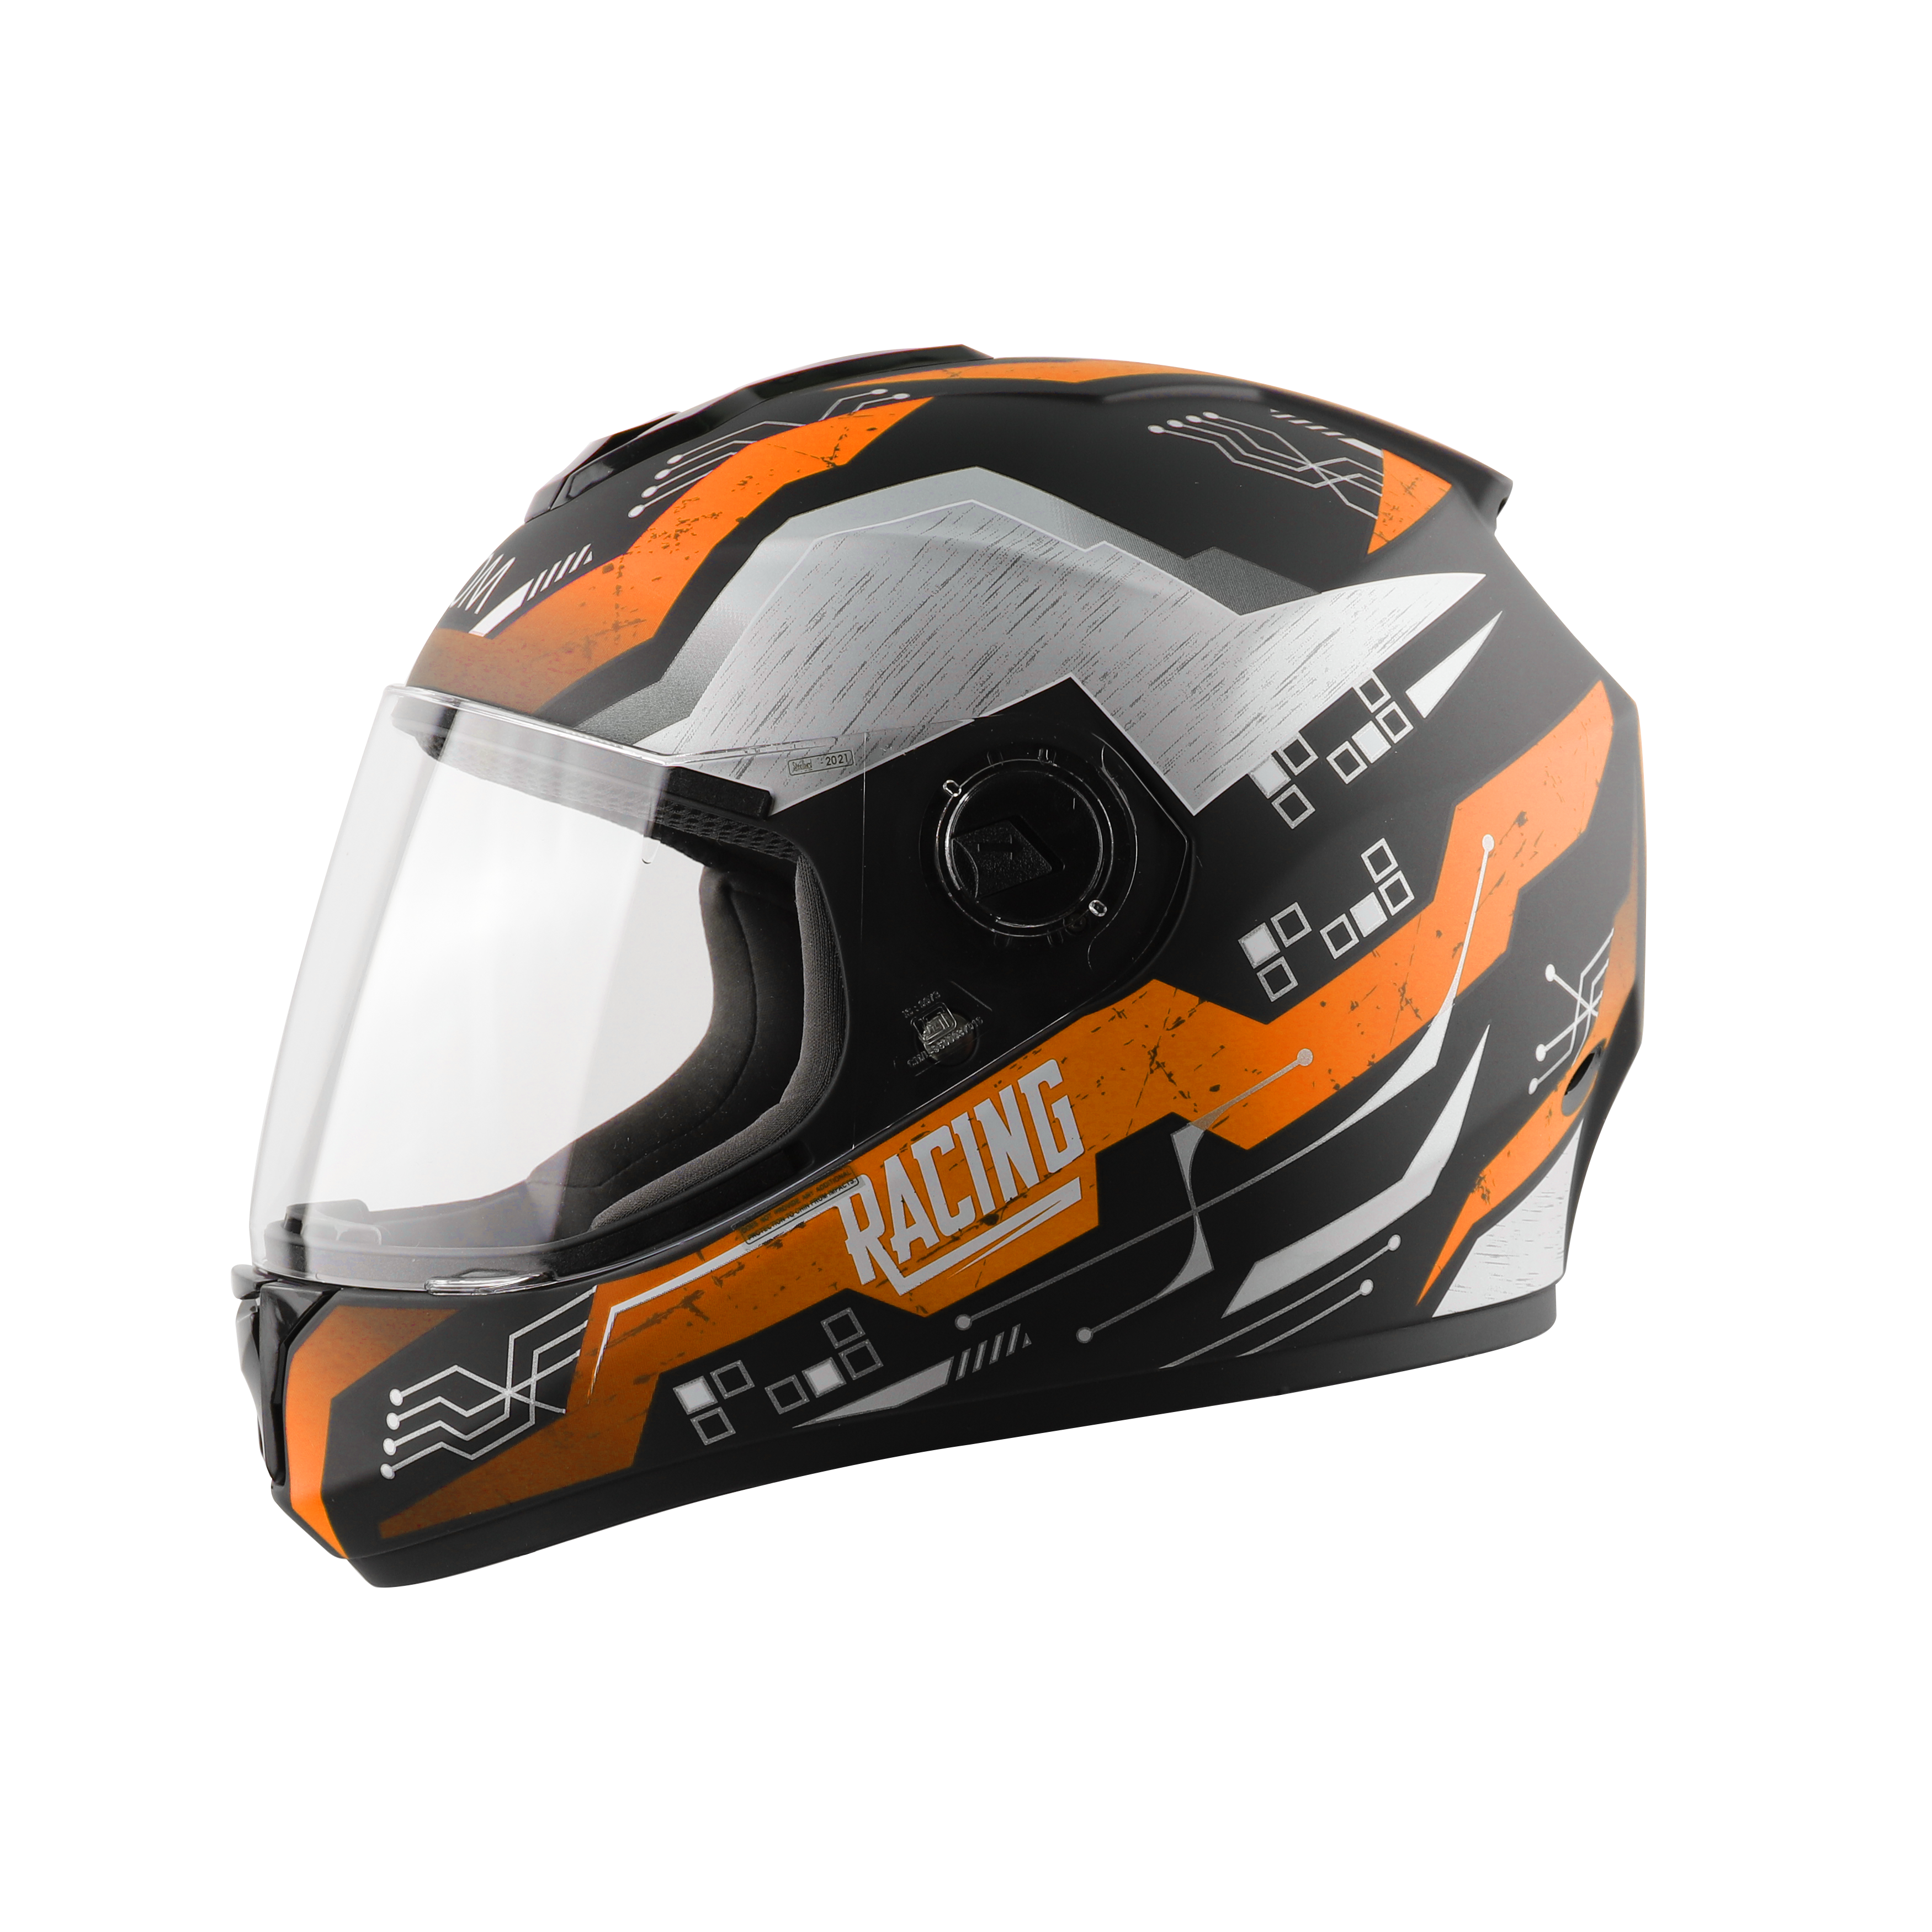 SBH-11 ZOOM RACING GLOSSY BLACK WITH FLUO ORANGE